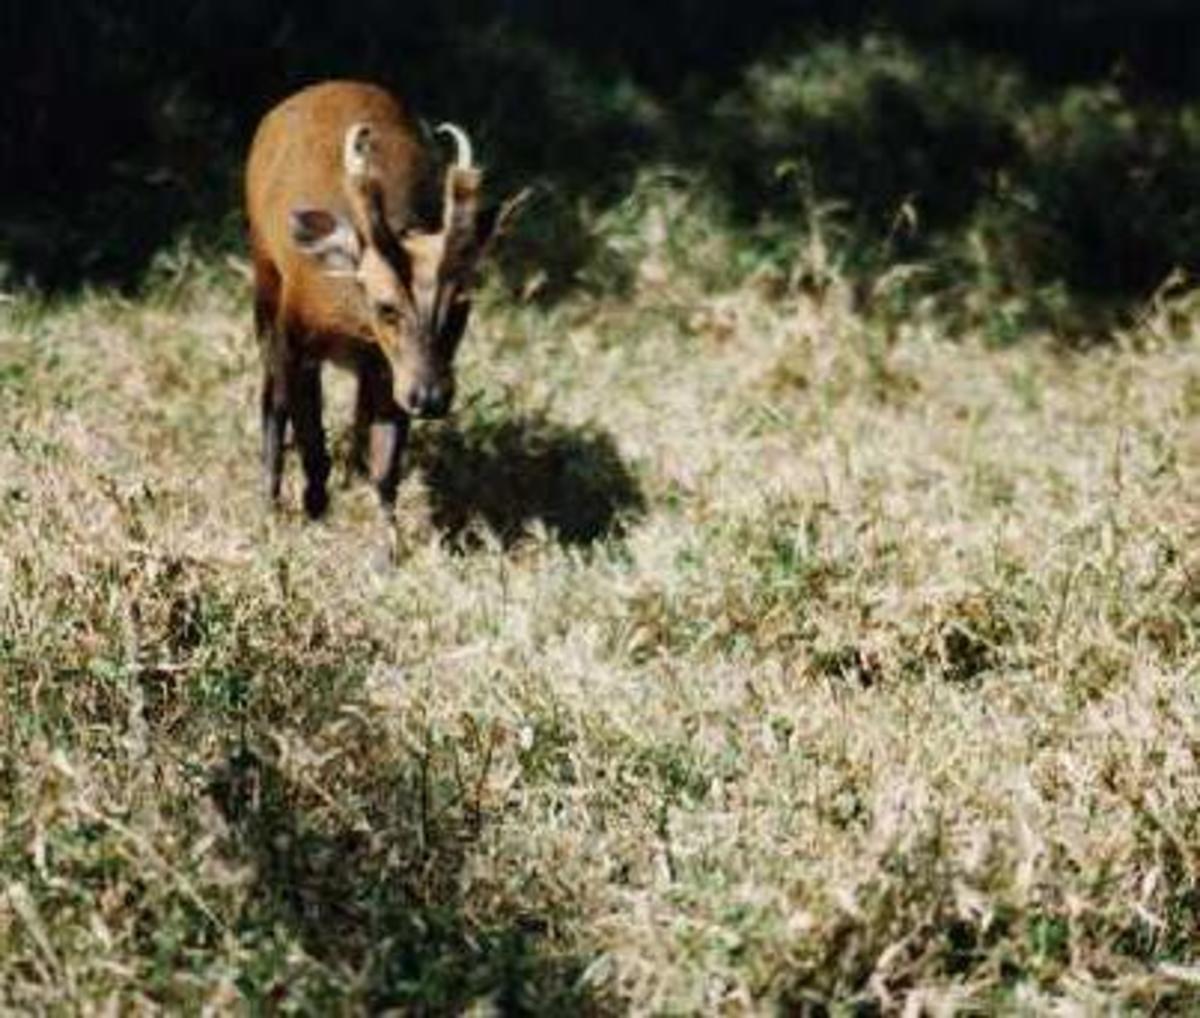 10.4% of Pakistan's land is allocated to National Parks and wildlife sanctuaries to protect its wildlife like this barking deer.